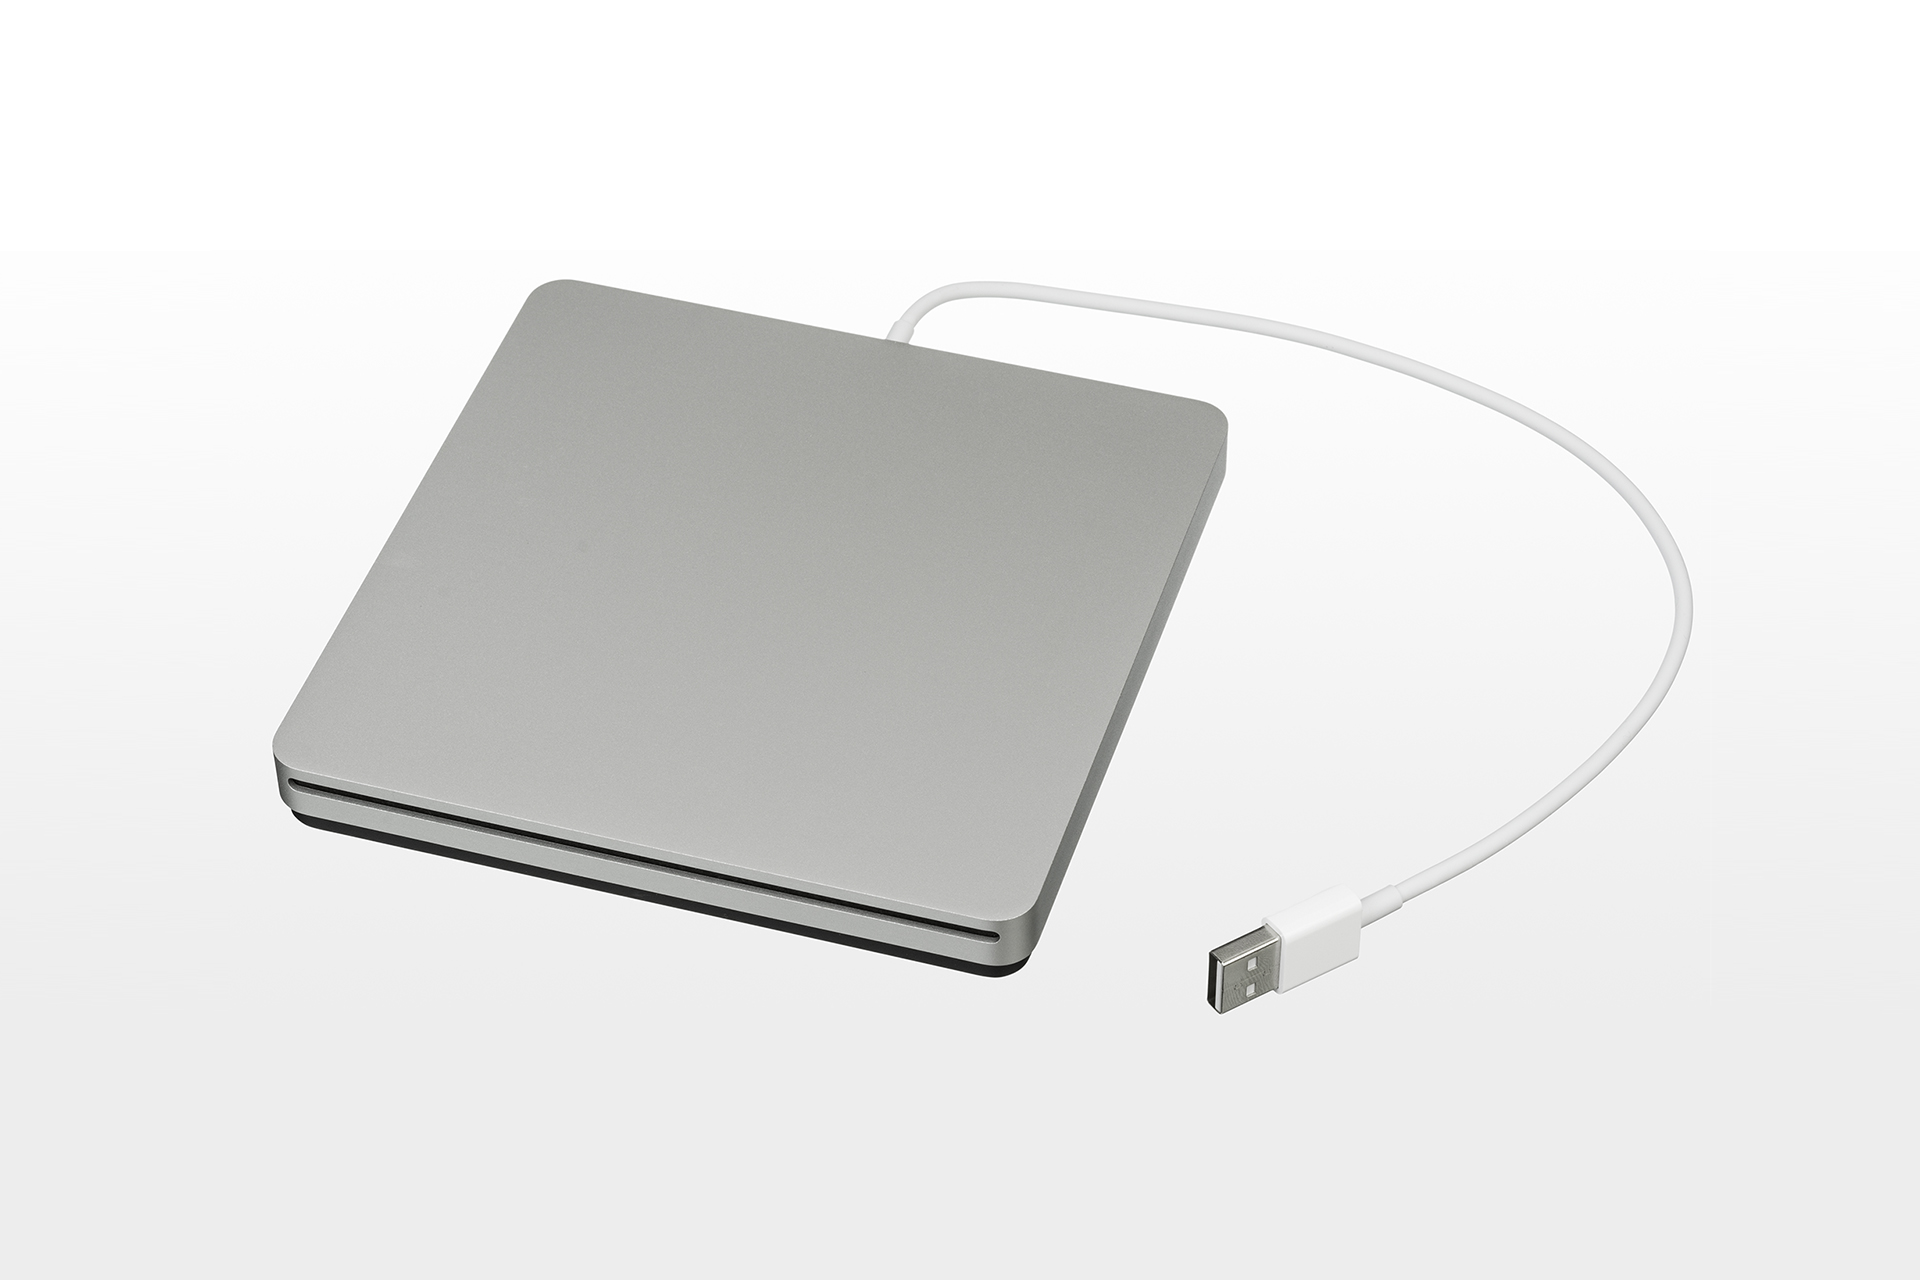 Necessary requirements: Ensure your Windows 10 operating system is up to date.
SuperDrive connection: Connect your Apple SuperDrive to your Windows 10 PC using a USB cable.